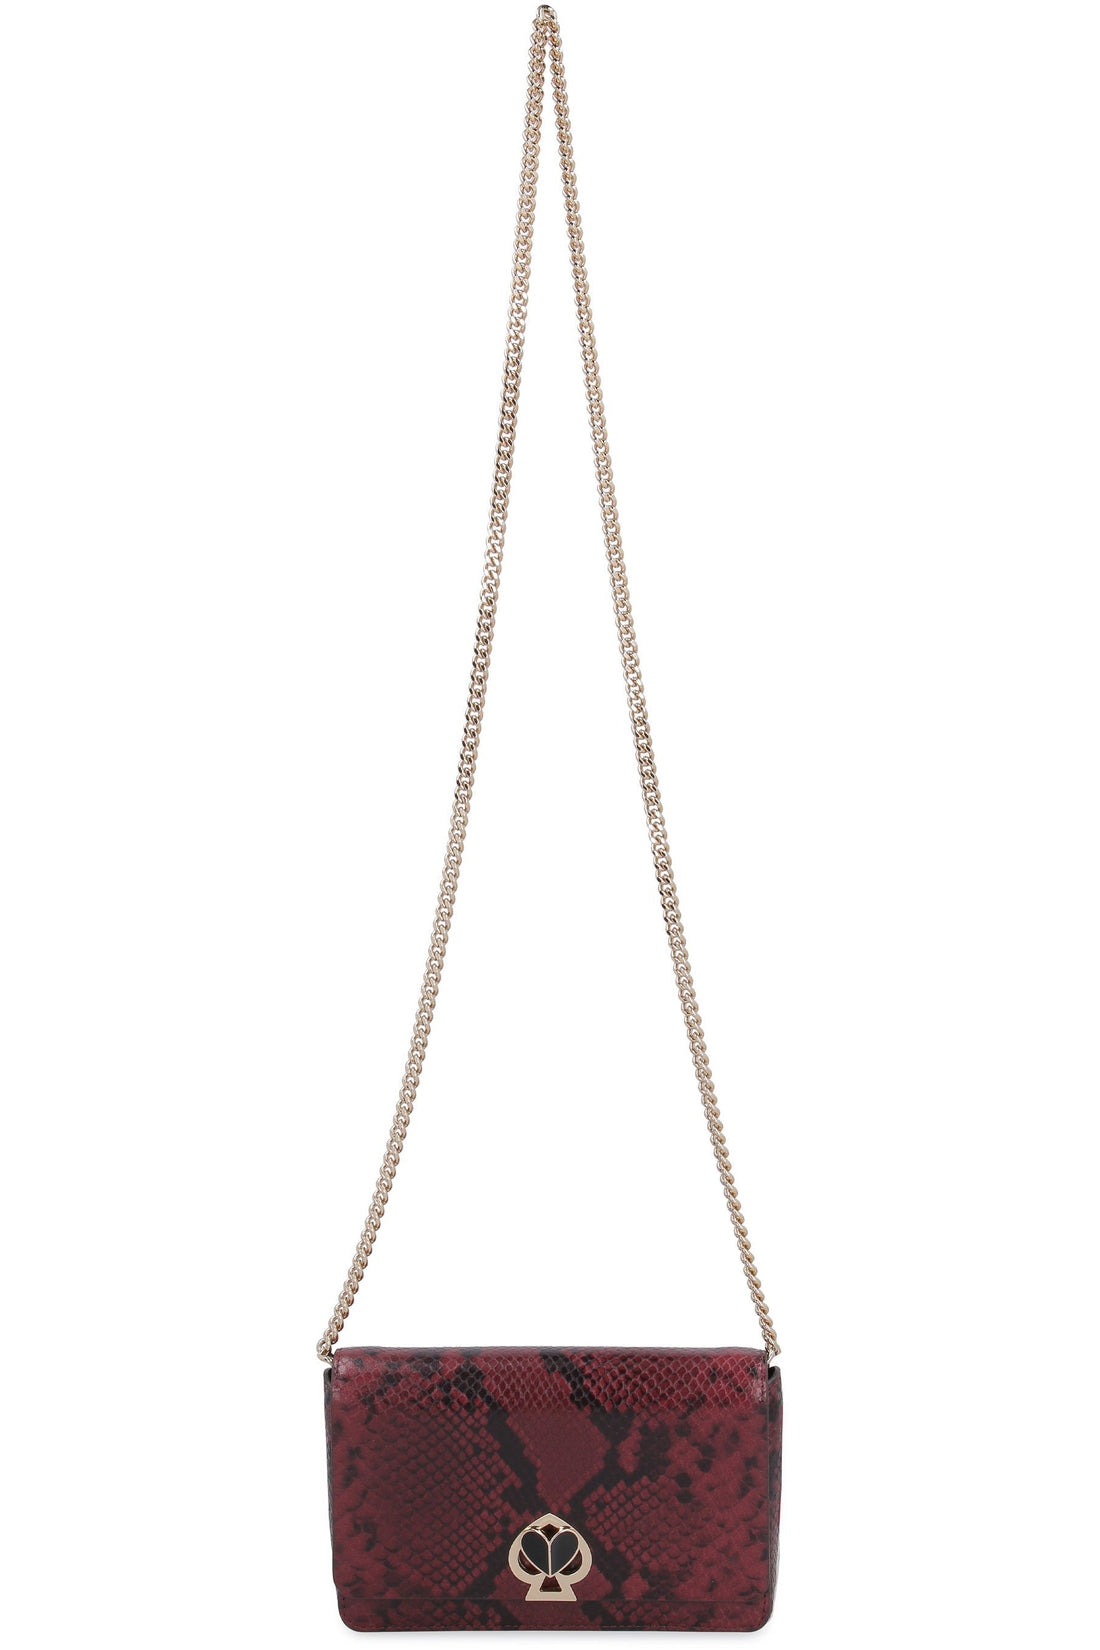 Kate Spade New York-OUTLET-SALE-Nicola printed leather wallet on chain-ARCHIVIST